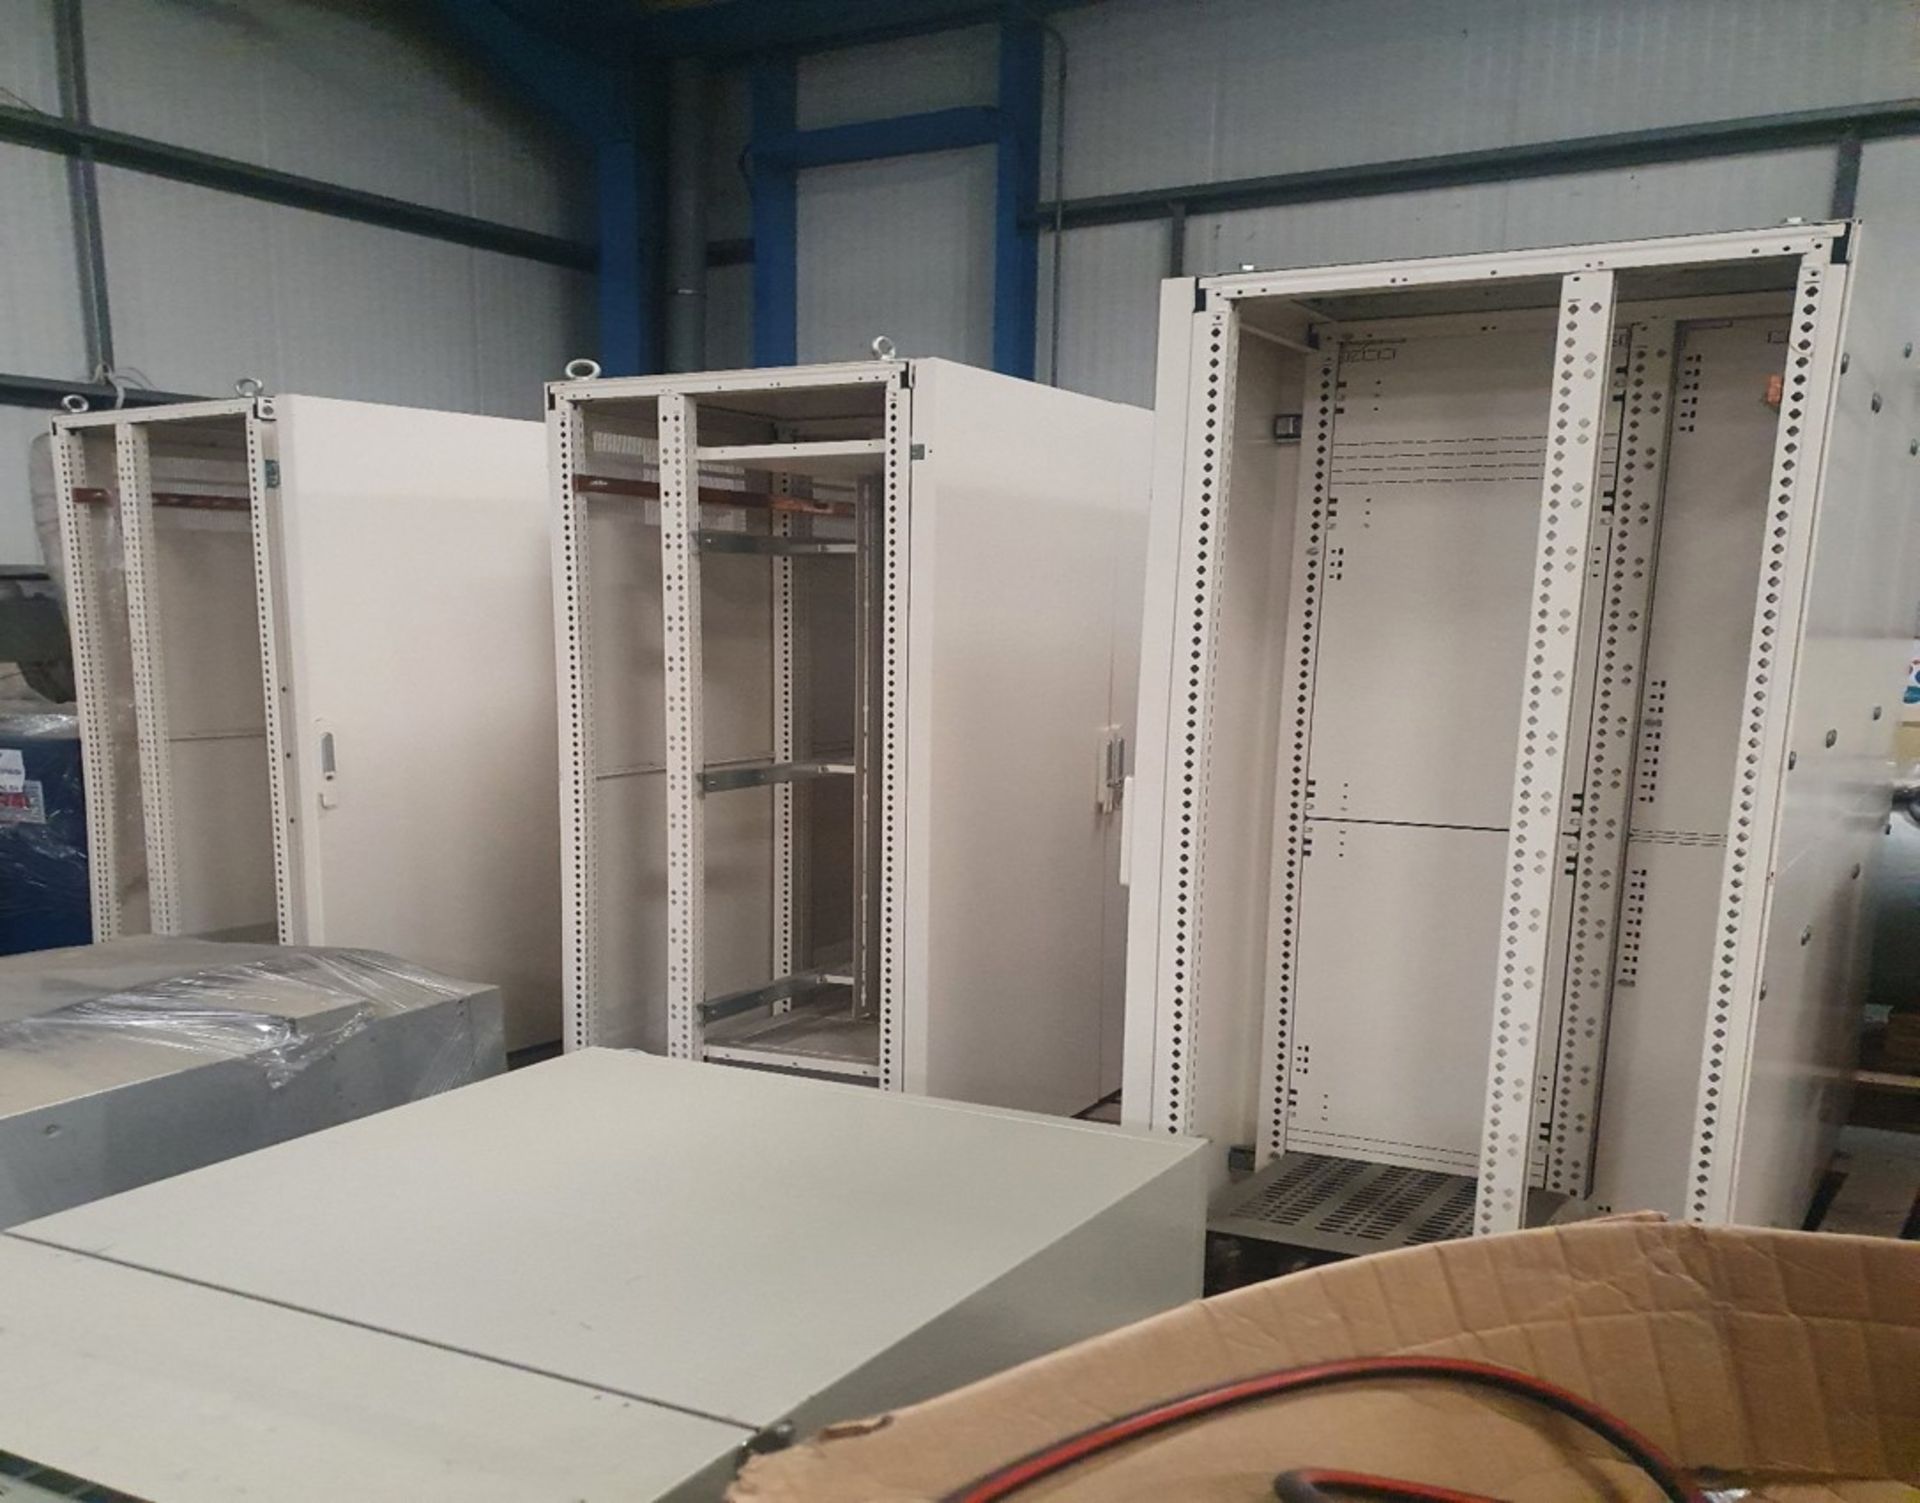 3 x Rittal & Other Electrical Cabinets